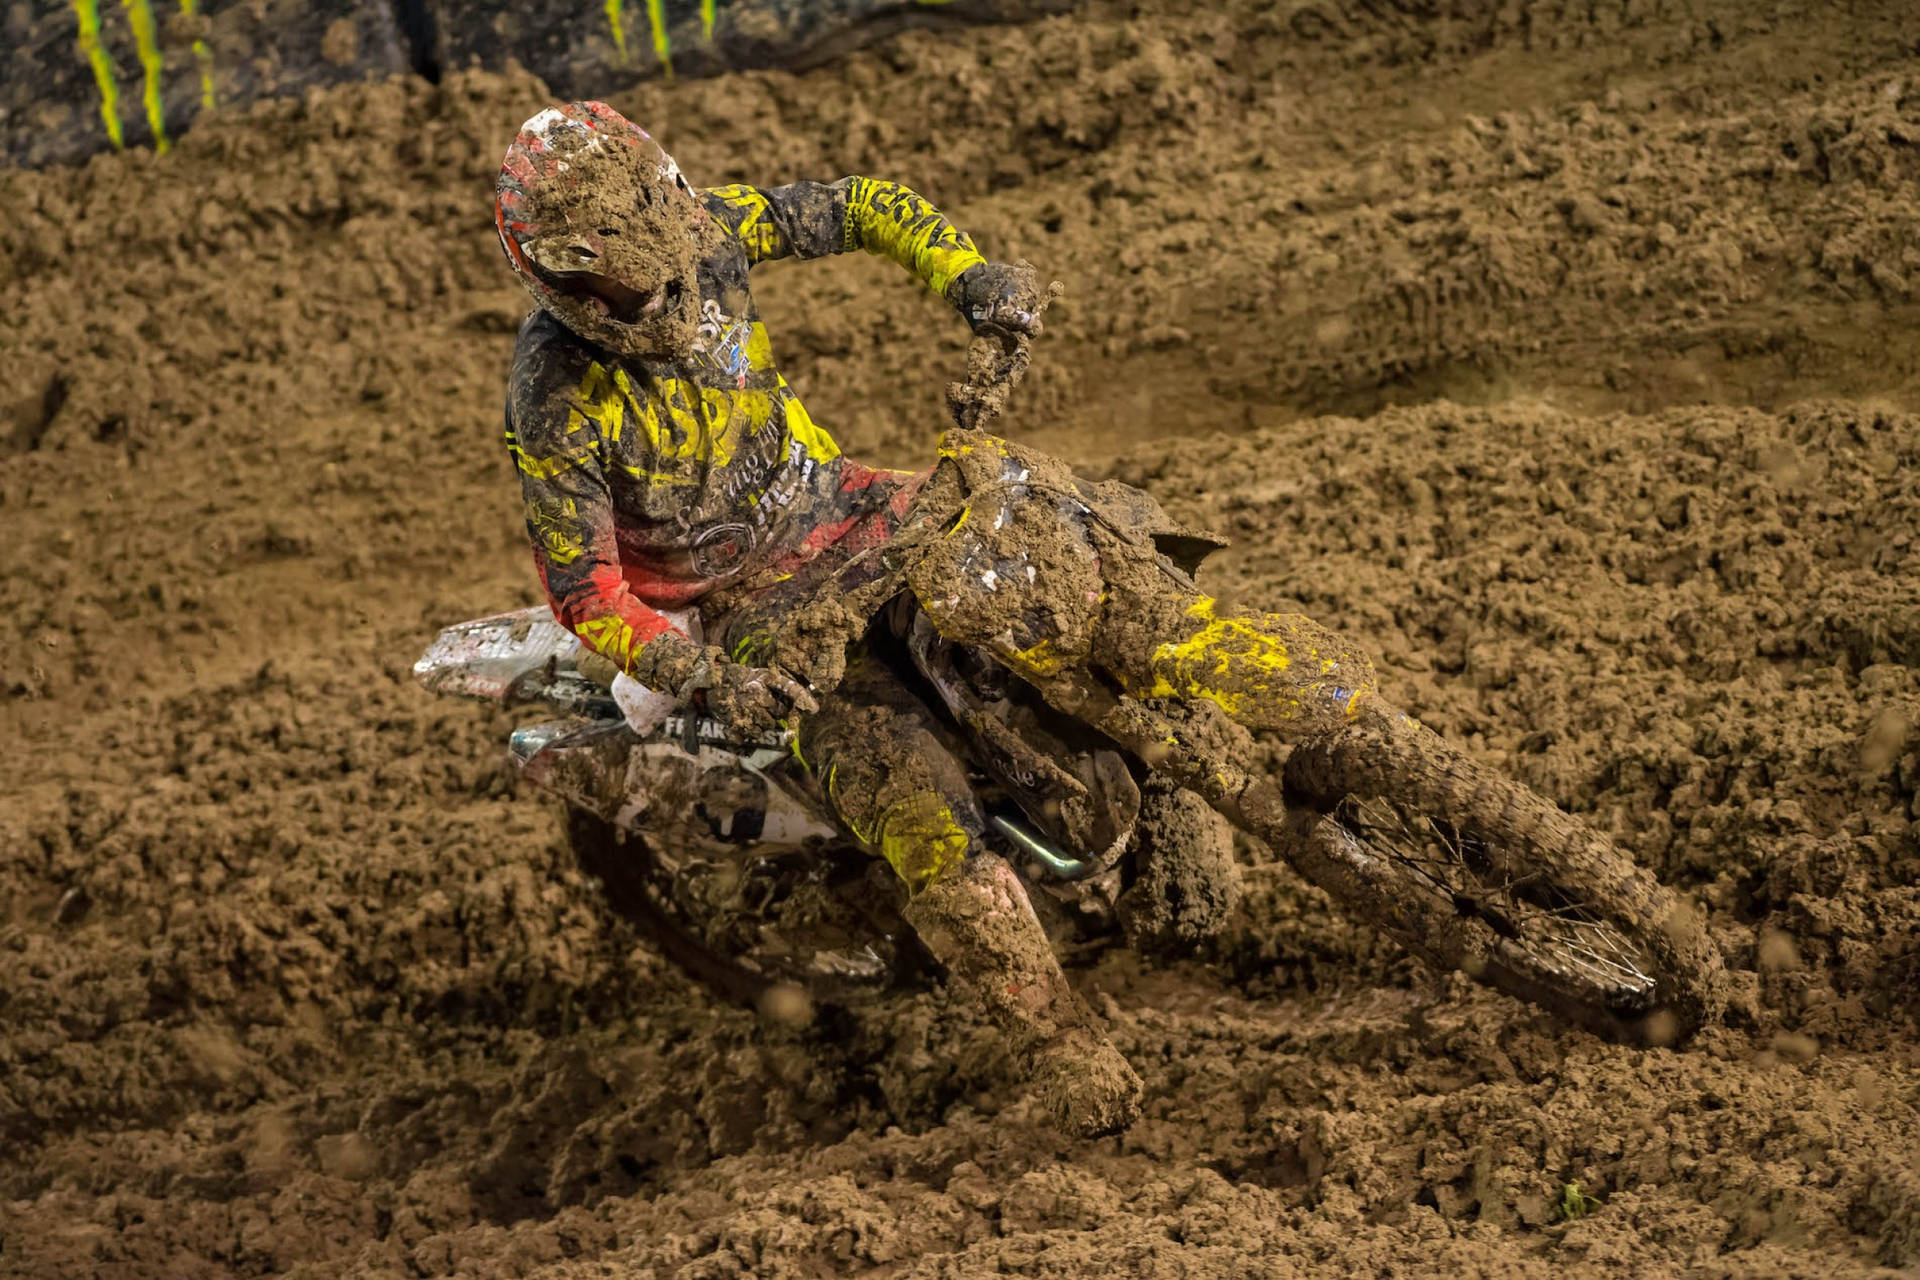 Conquer the Trails with a Fox Dirt Bike Wallpaper